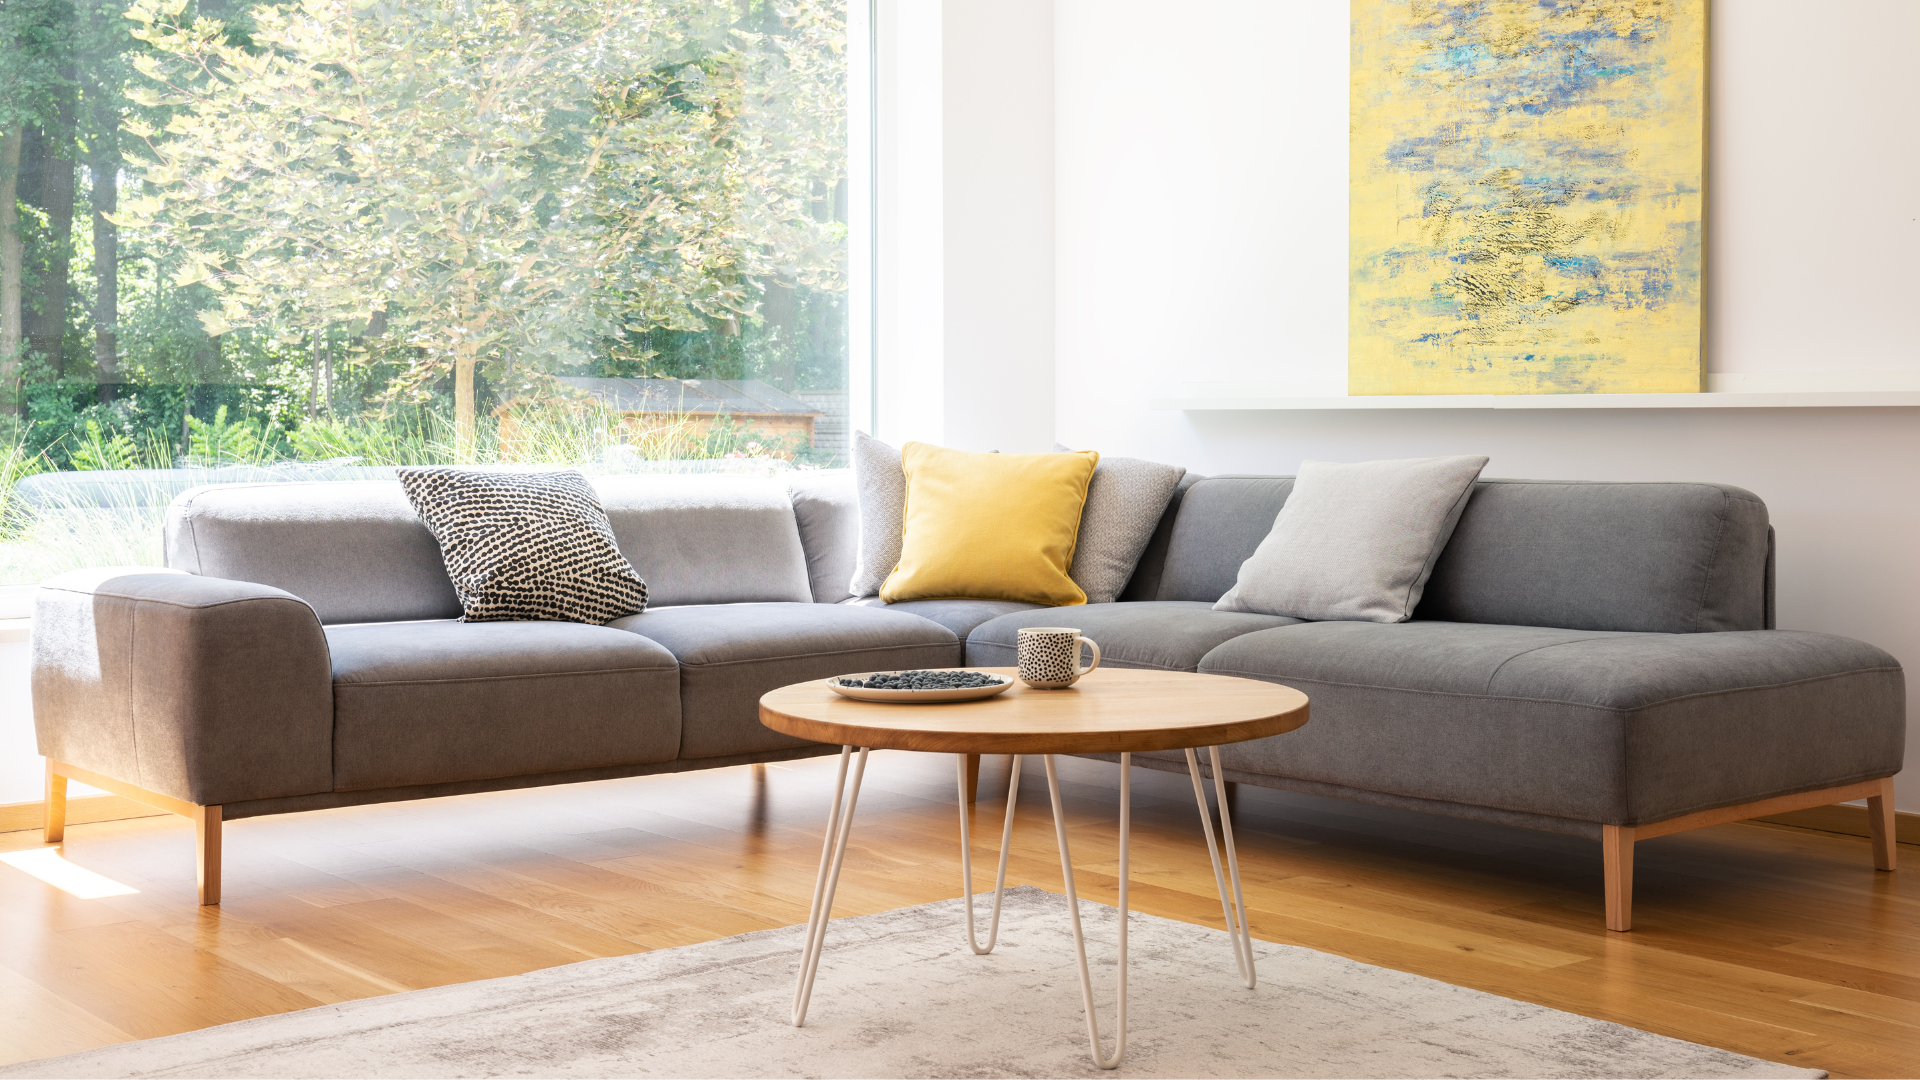 Modern grey sectional sofa and round coffee table